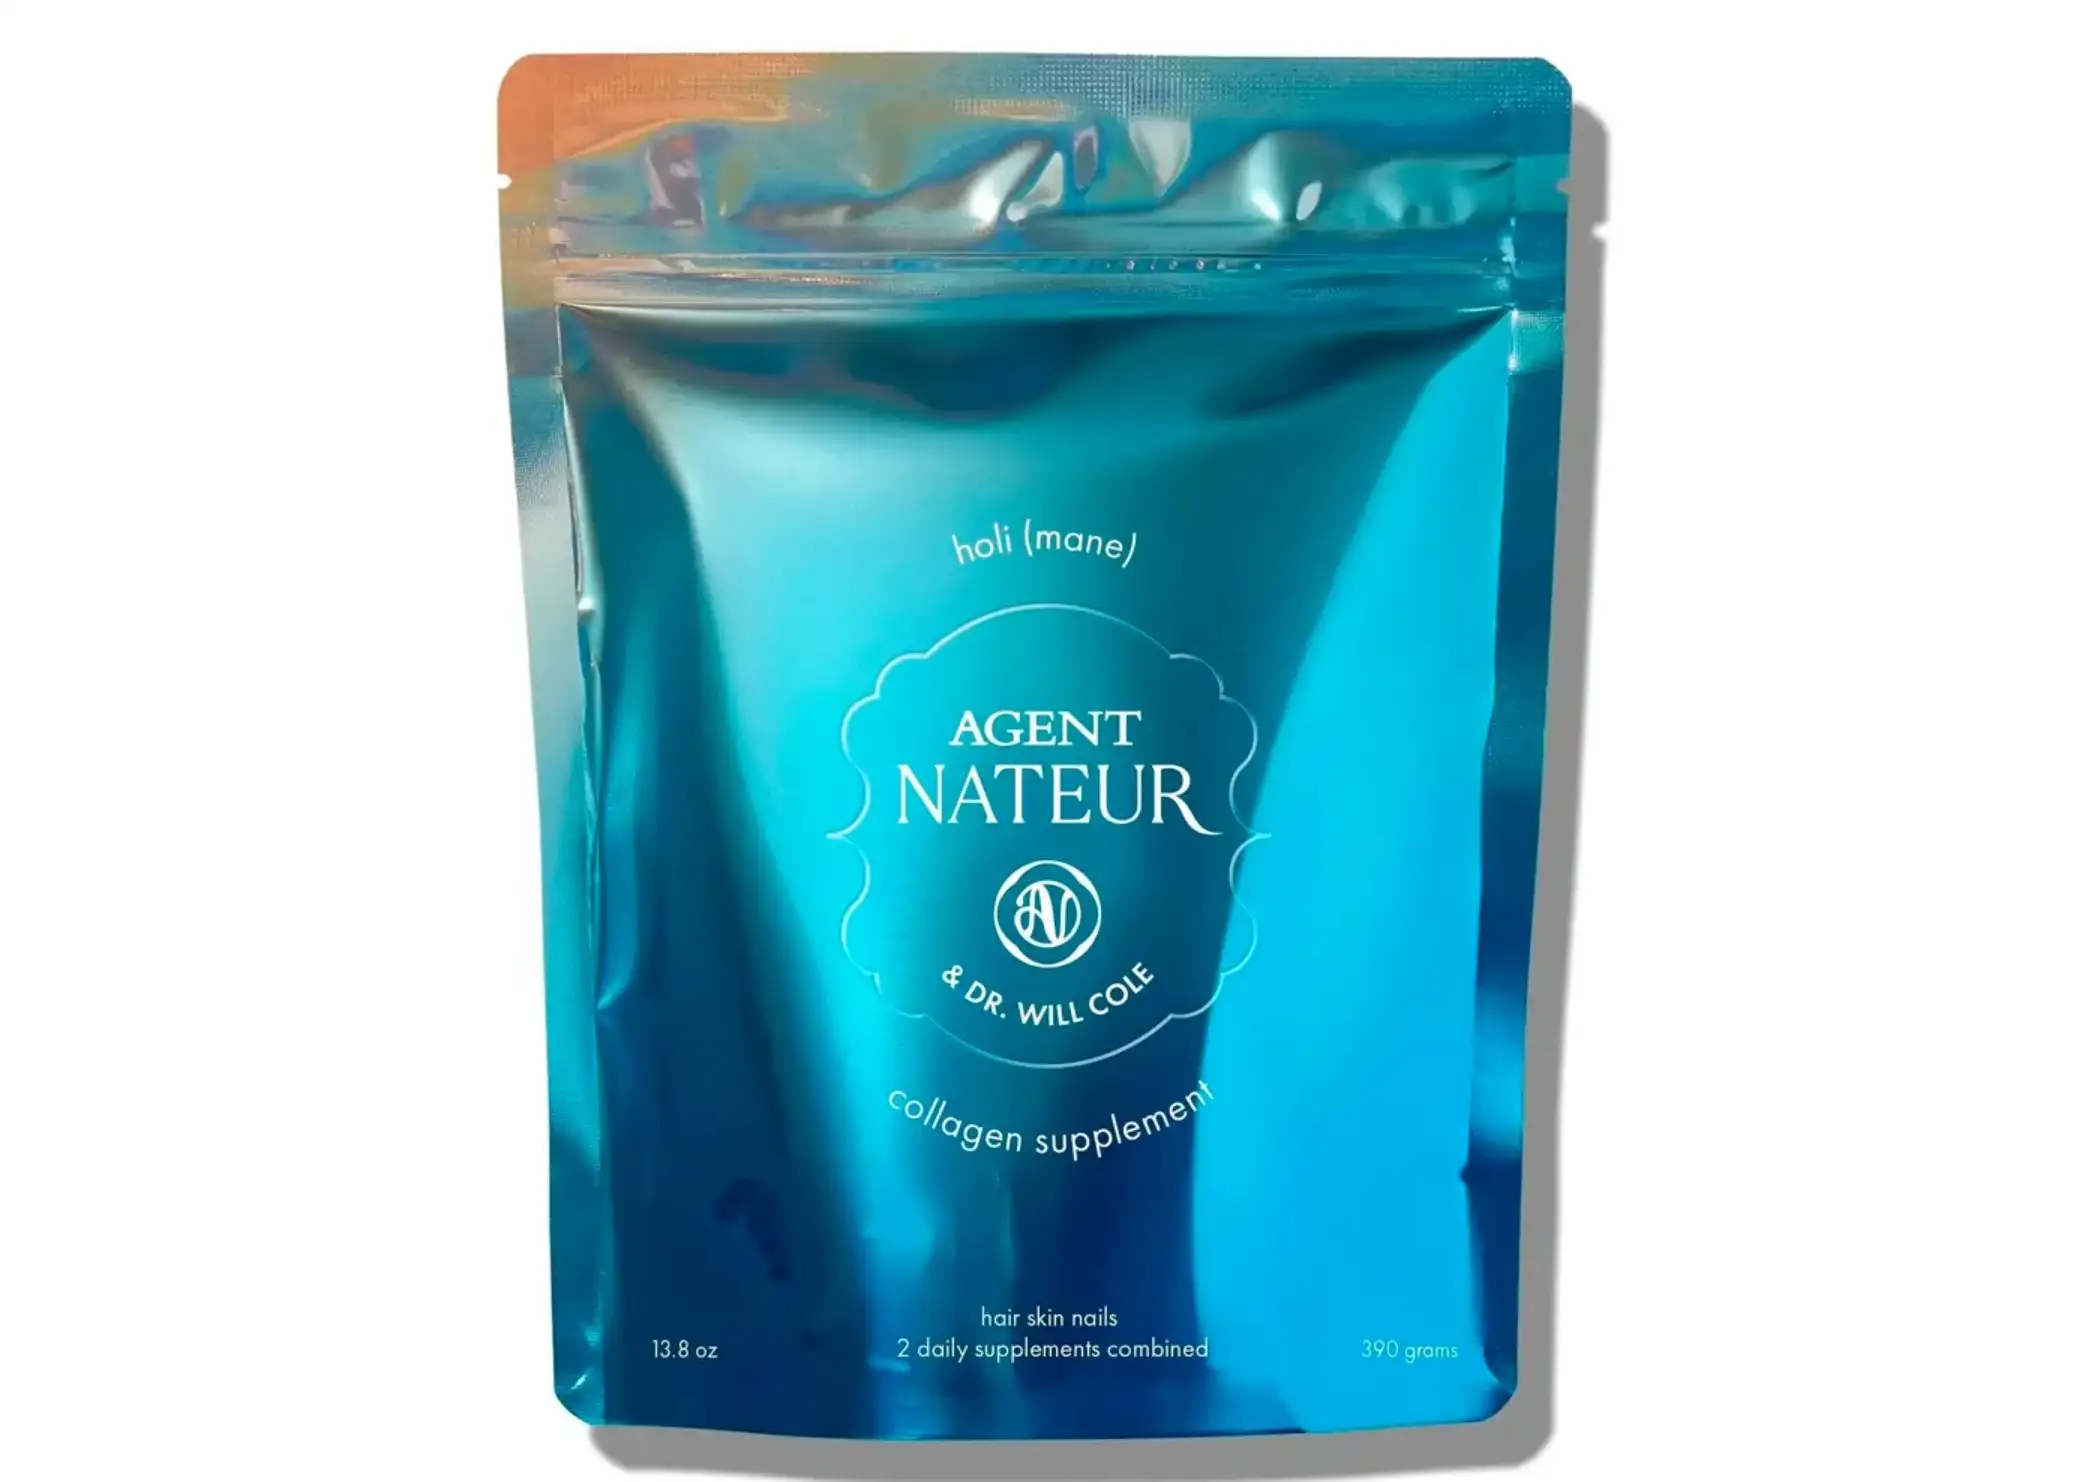 You are currently viewing Agent Nateur Collagen Reviews: Is Agent Nateur Collagen Worth It?